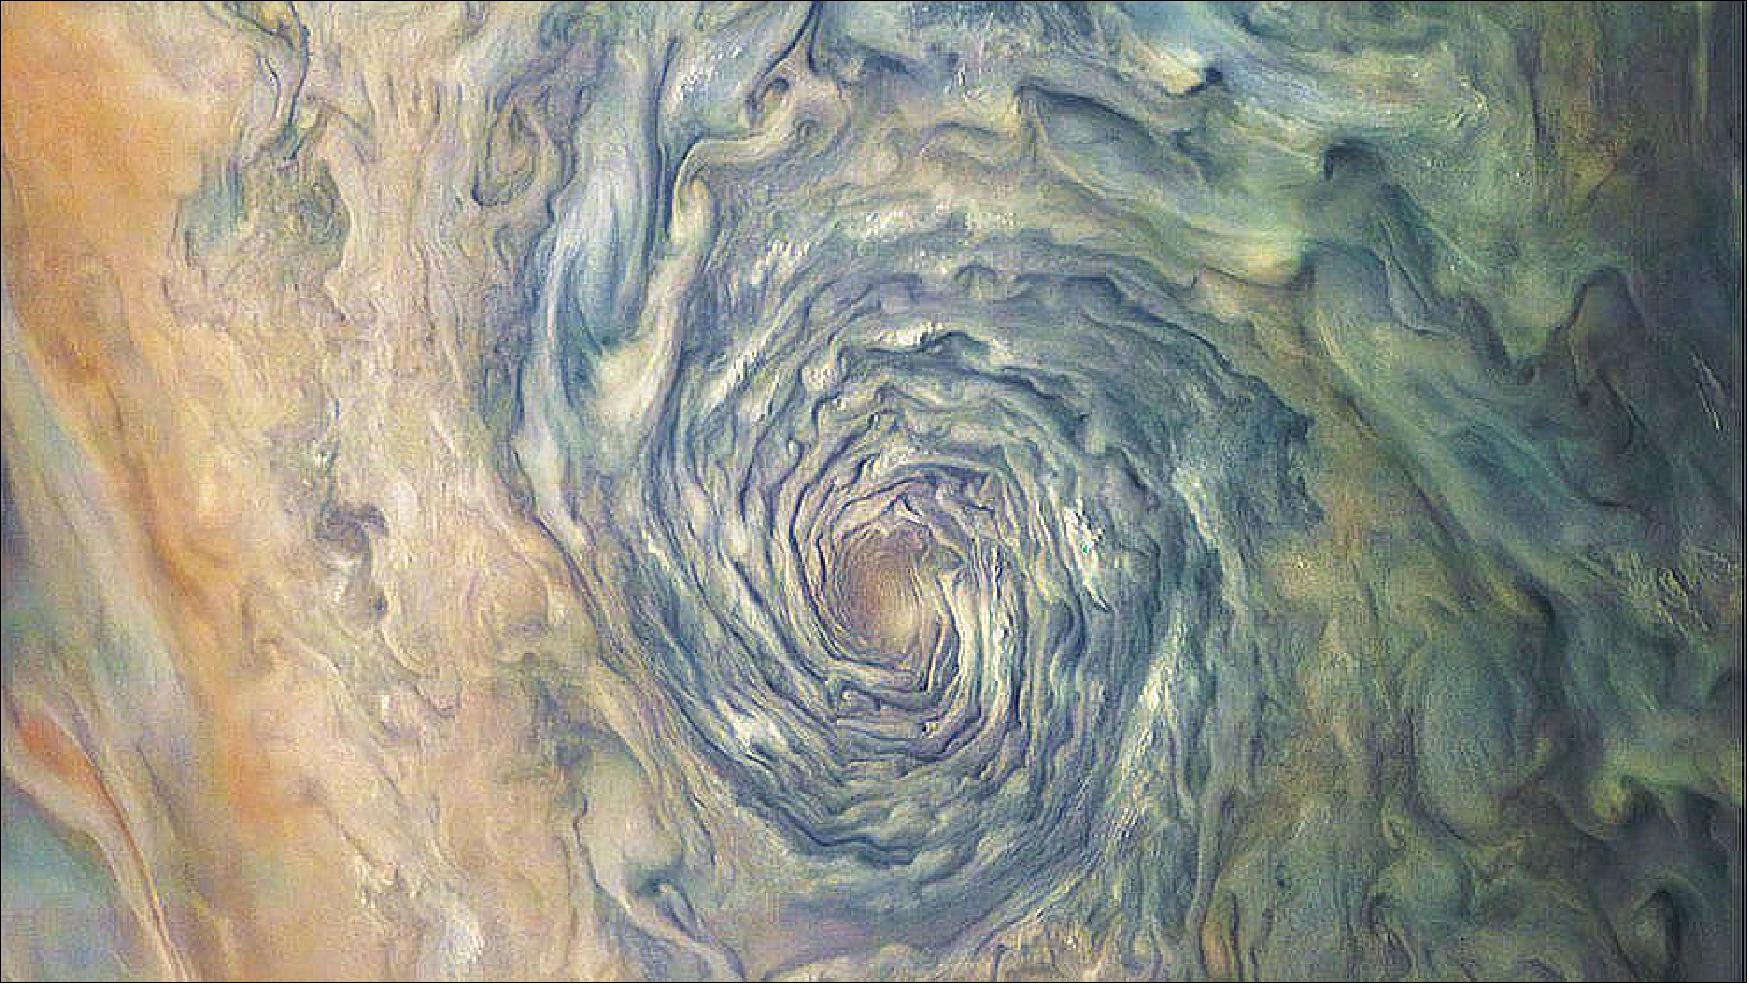 Figure 39: Soft pastels enhance the rich colors of the swirls and storms in Jupiter's clouds. This image of a vortex on Jupiter, taken by the Juno mission camera, JunoCam, captures the amazing internal structure of the giant storm (image credits: Image data: NASA/JPL-Caltech/SwRI/MSSS Image processing by Gerald Eichstädt/Seán Doran, © BY NC ND)